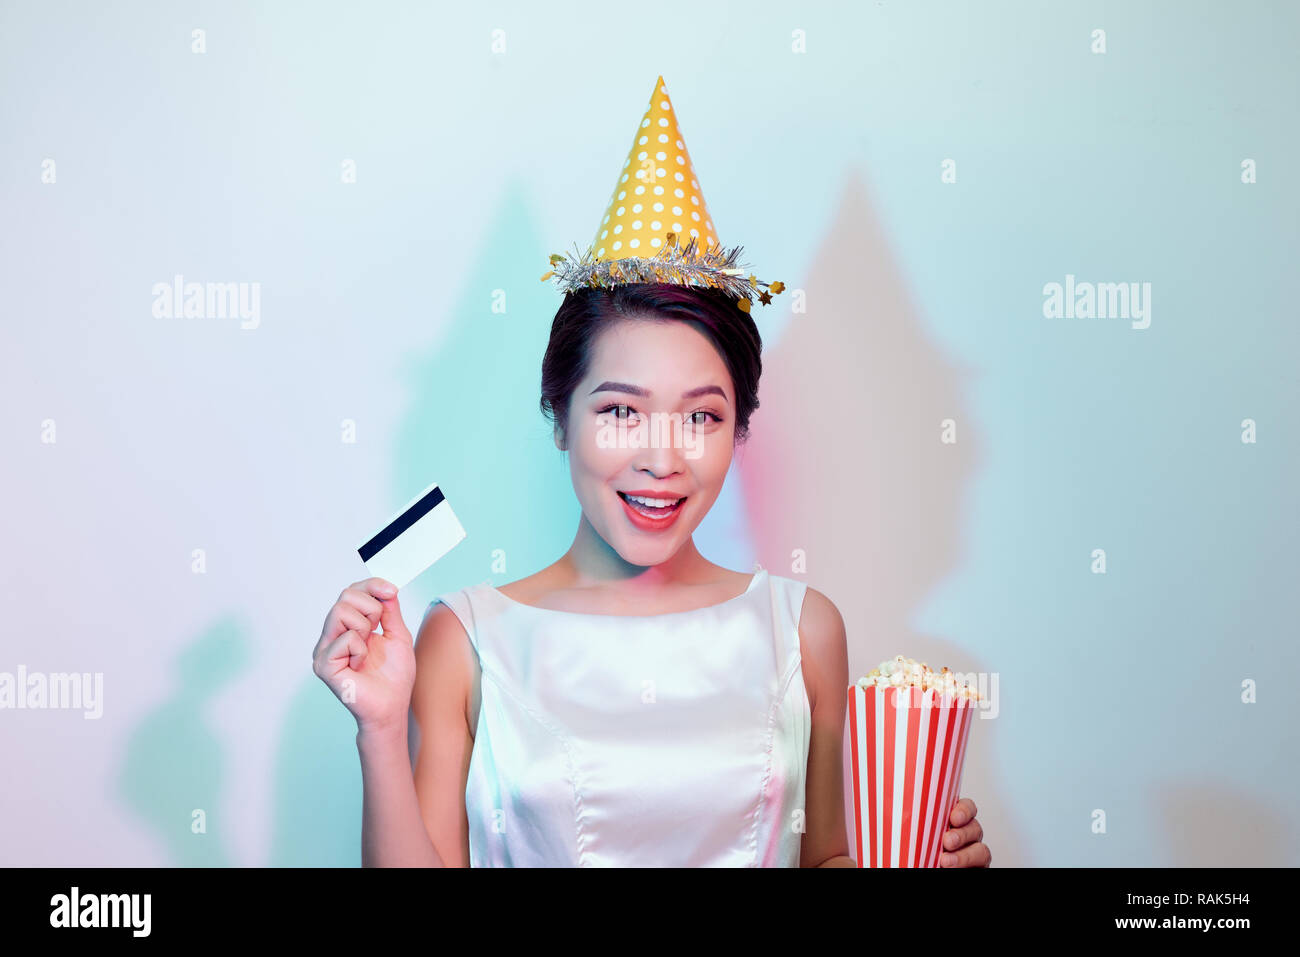 Portrait of young overjoyed attractive woman in white dress watching movie film, holding bucket of popcorn and credit card isolated on white backgroun Stock Photo